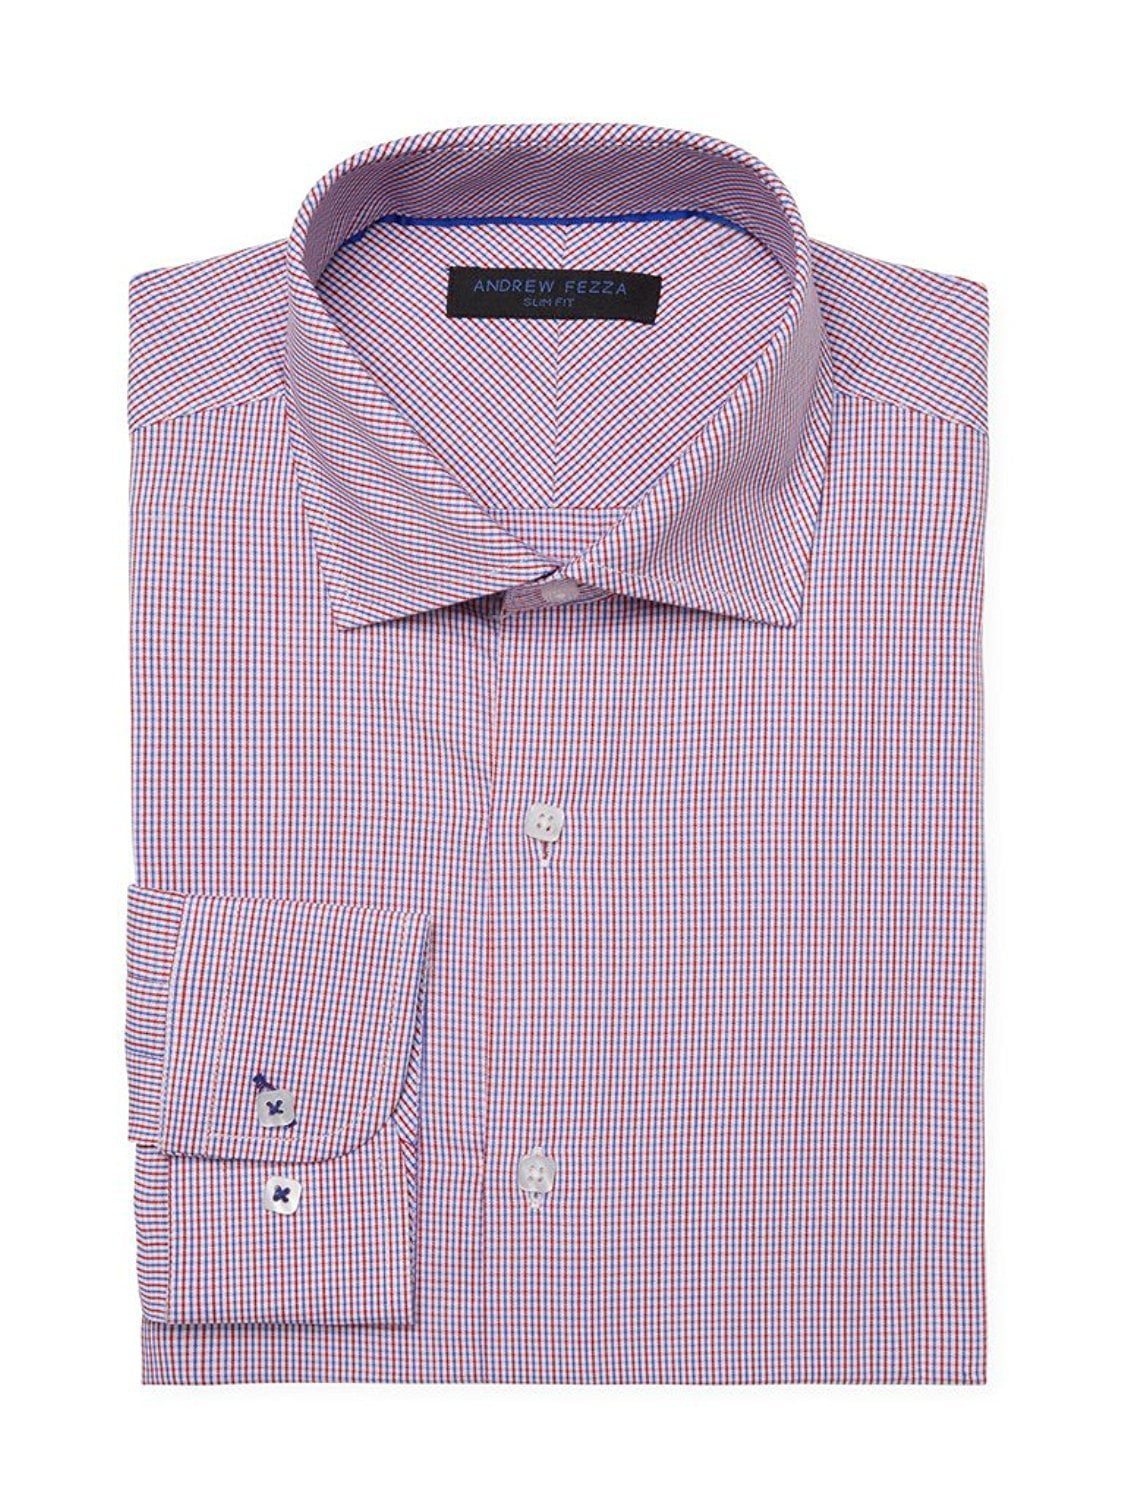 Available in Many Paterns and Colors Andrew Fezza Mens Slim Fit Dress Shirt 